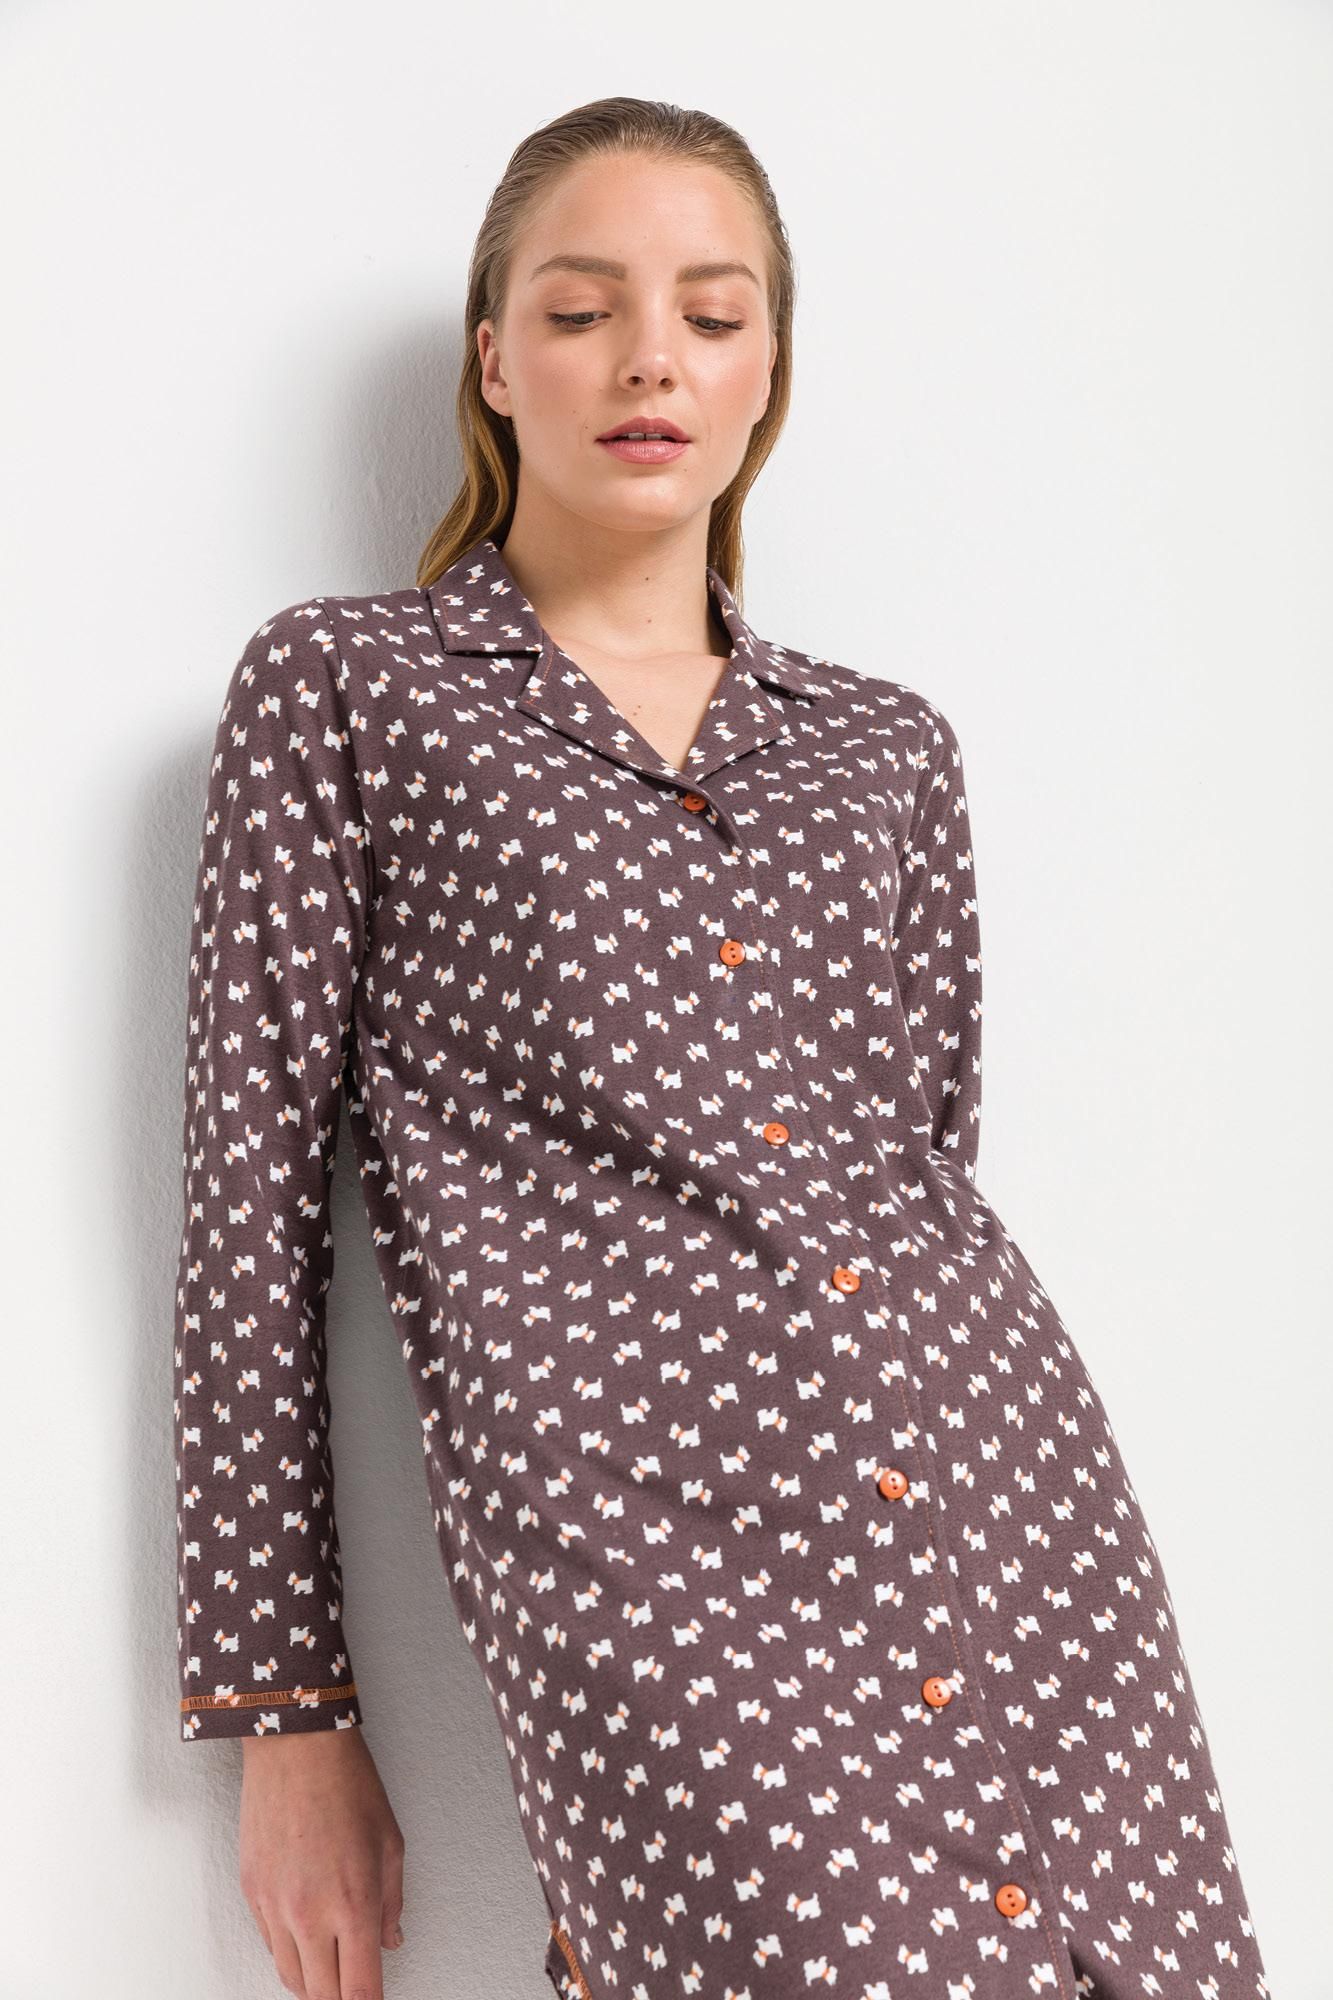 Women’s Patterned Maternity Nightgown Plus Size